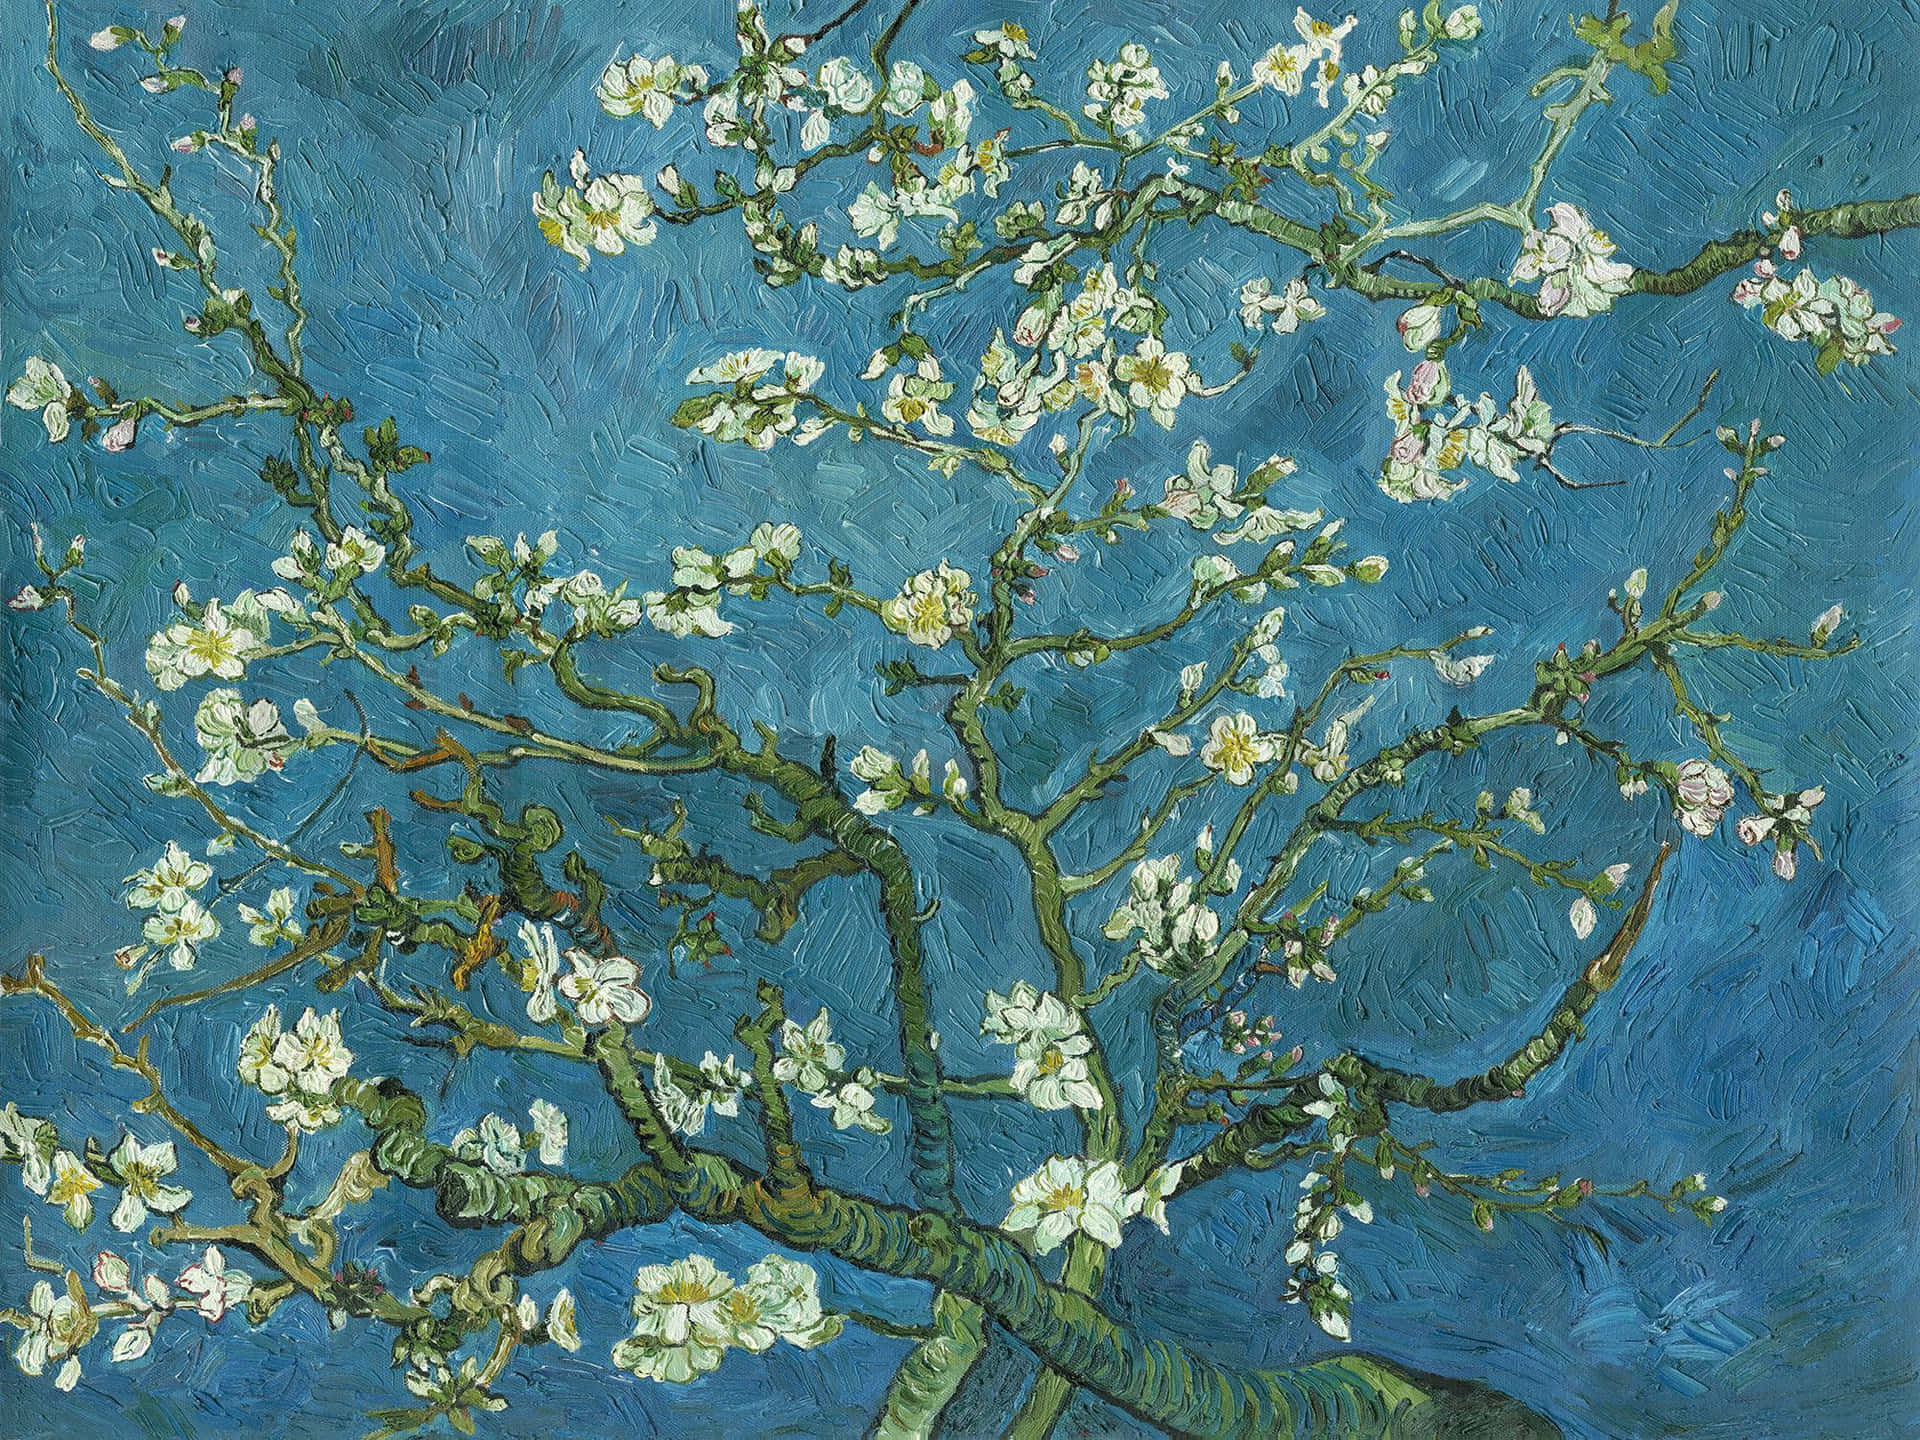 An iconic painting of almond blossoms by Vincent Van Gogh Wallpaper